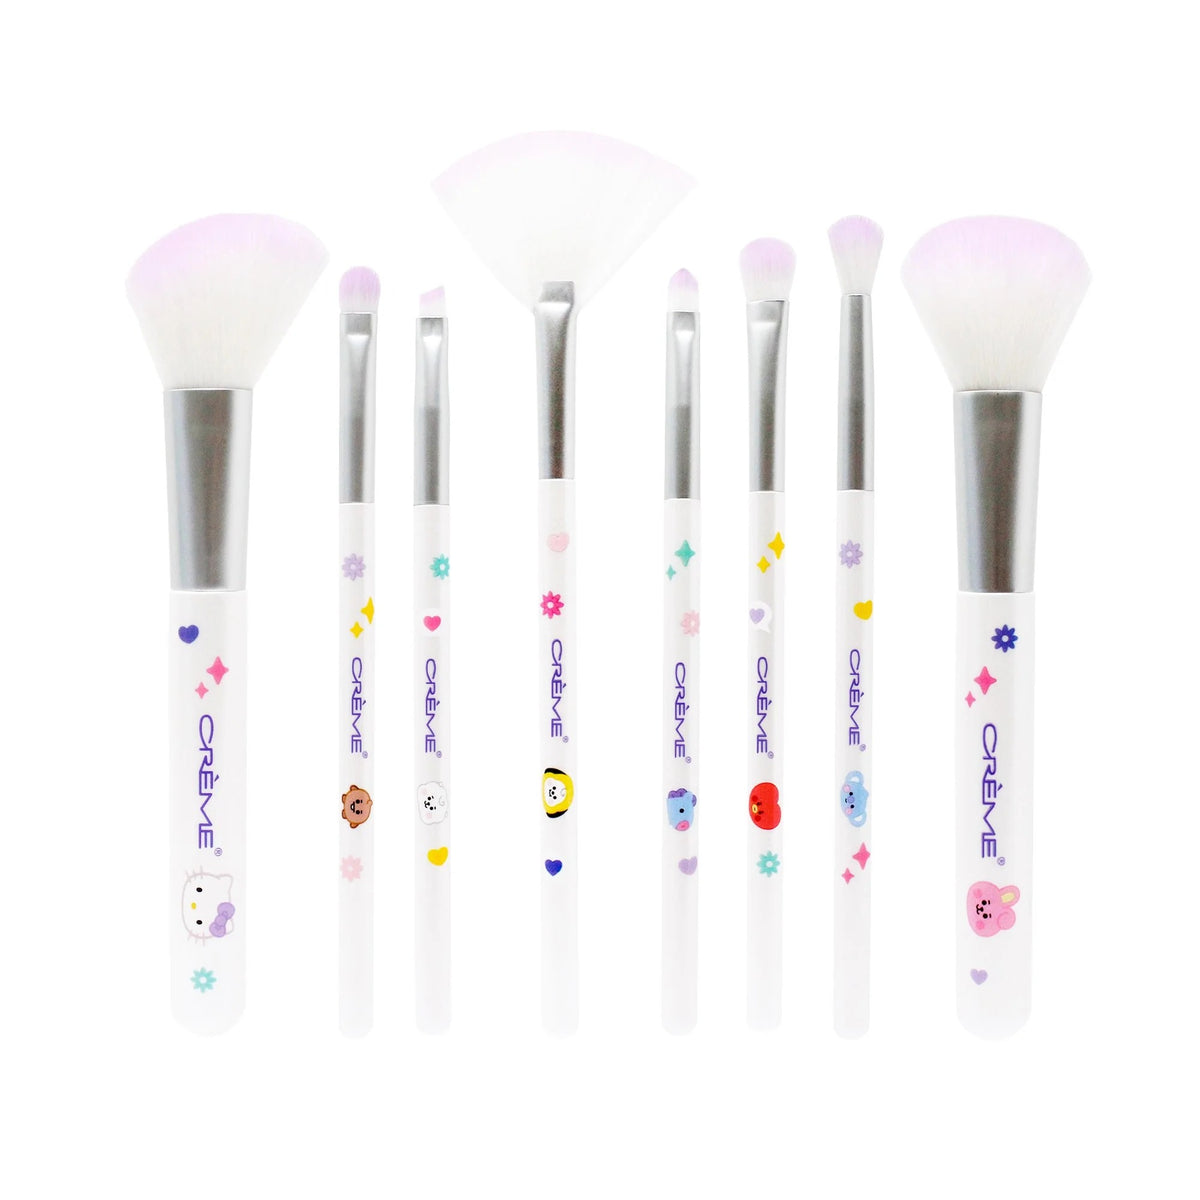 Hello Kitty &amp; BT21 Dreamy Essentials Makeup Brush Collection (Set of 8) Beauty The Crème Shop   